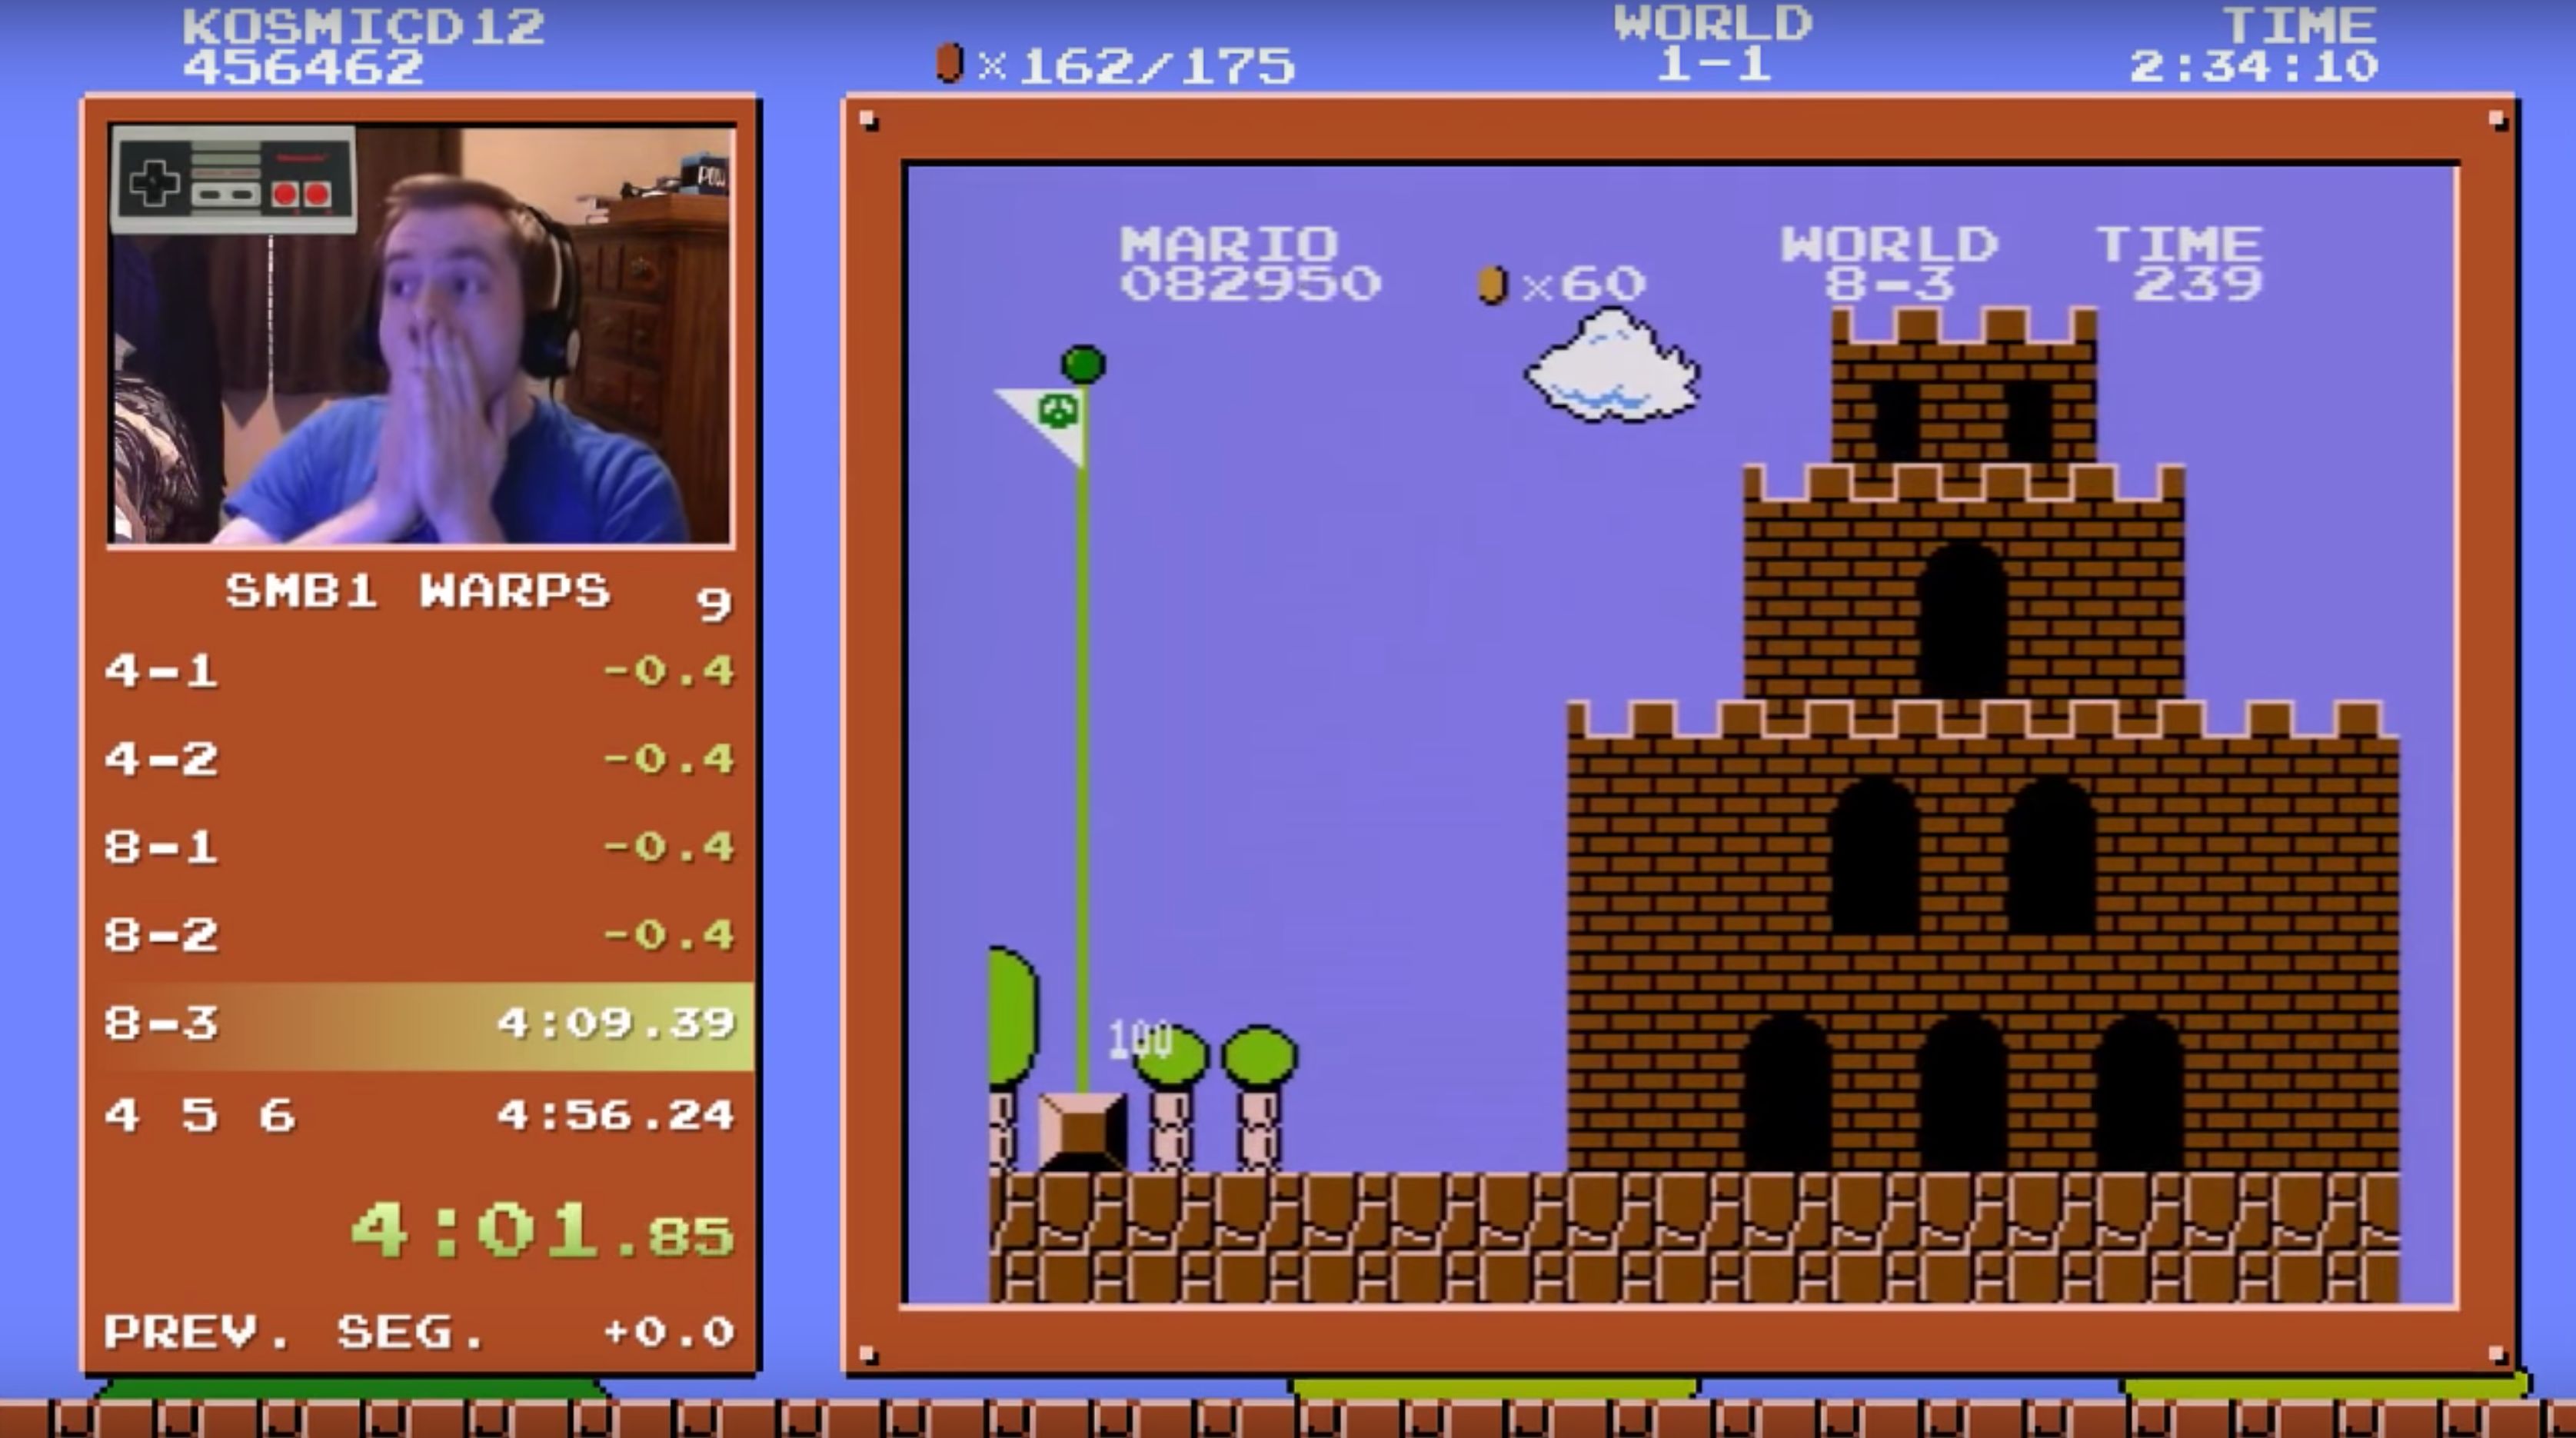 what is the world record for super mario bros